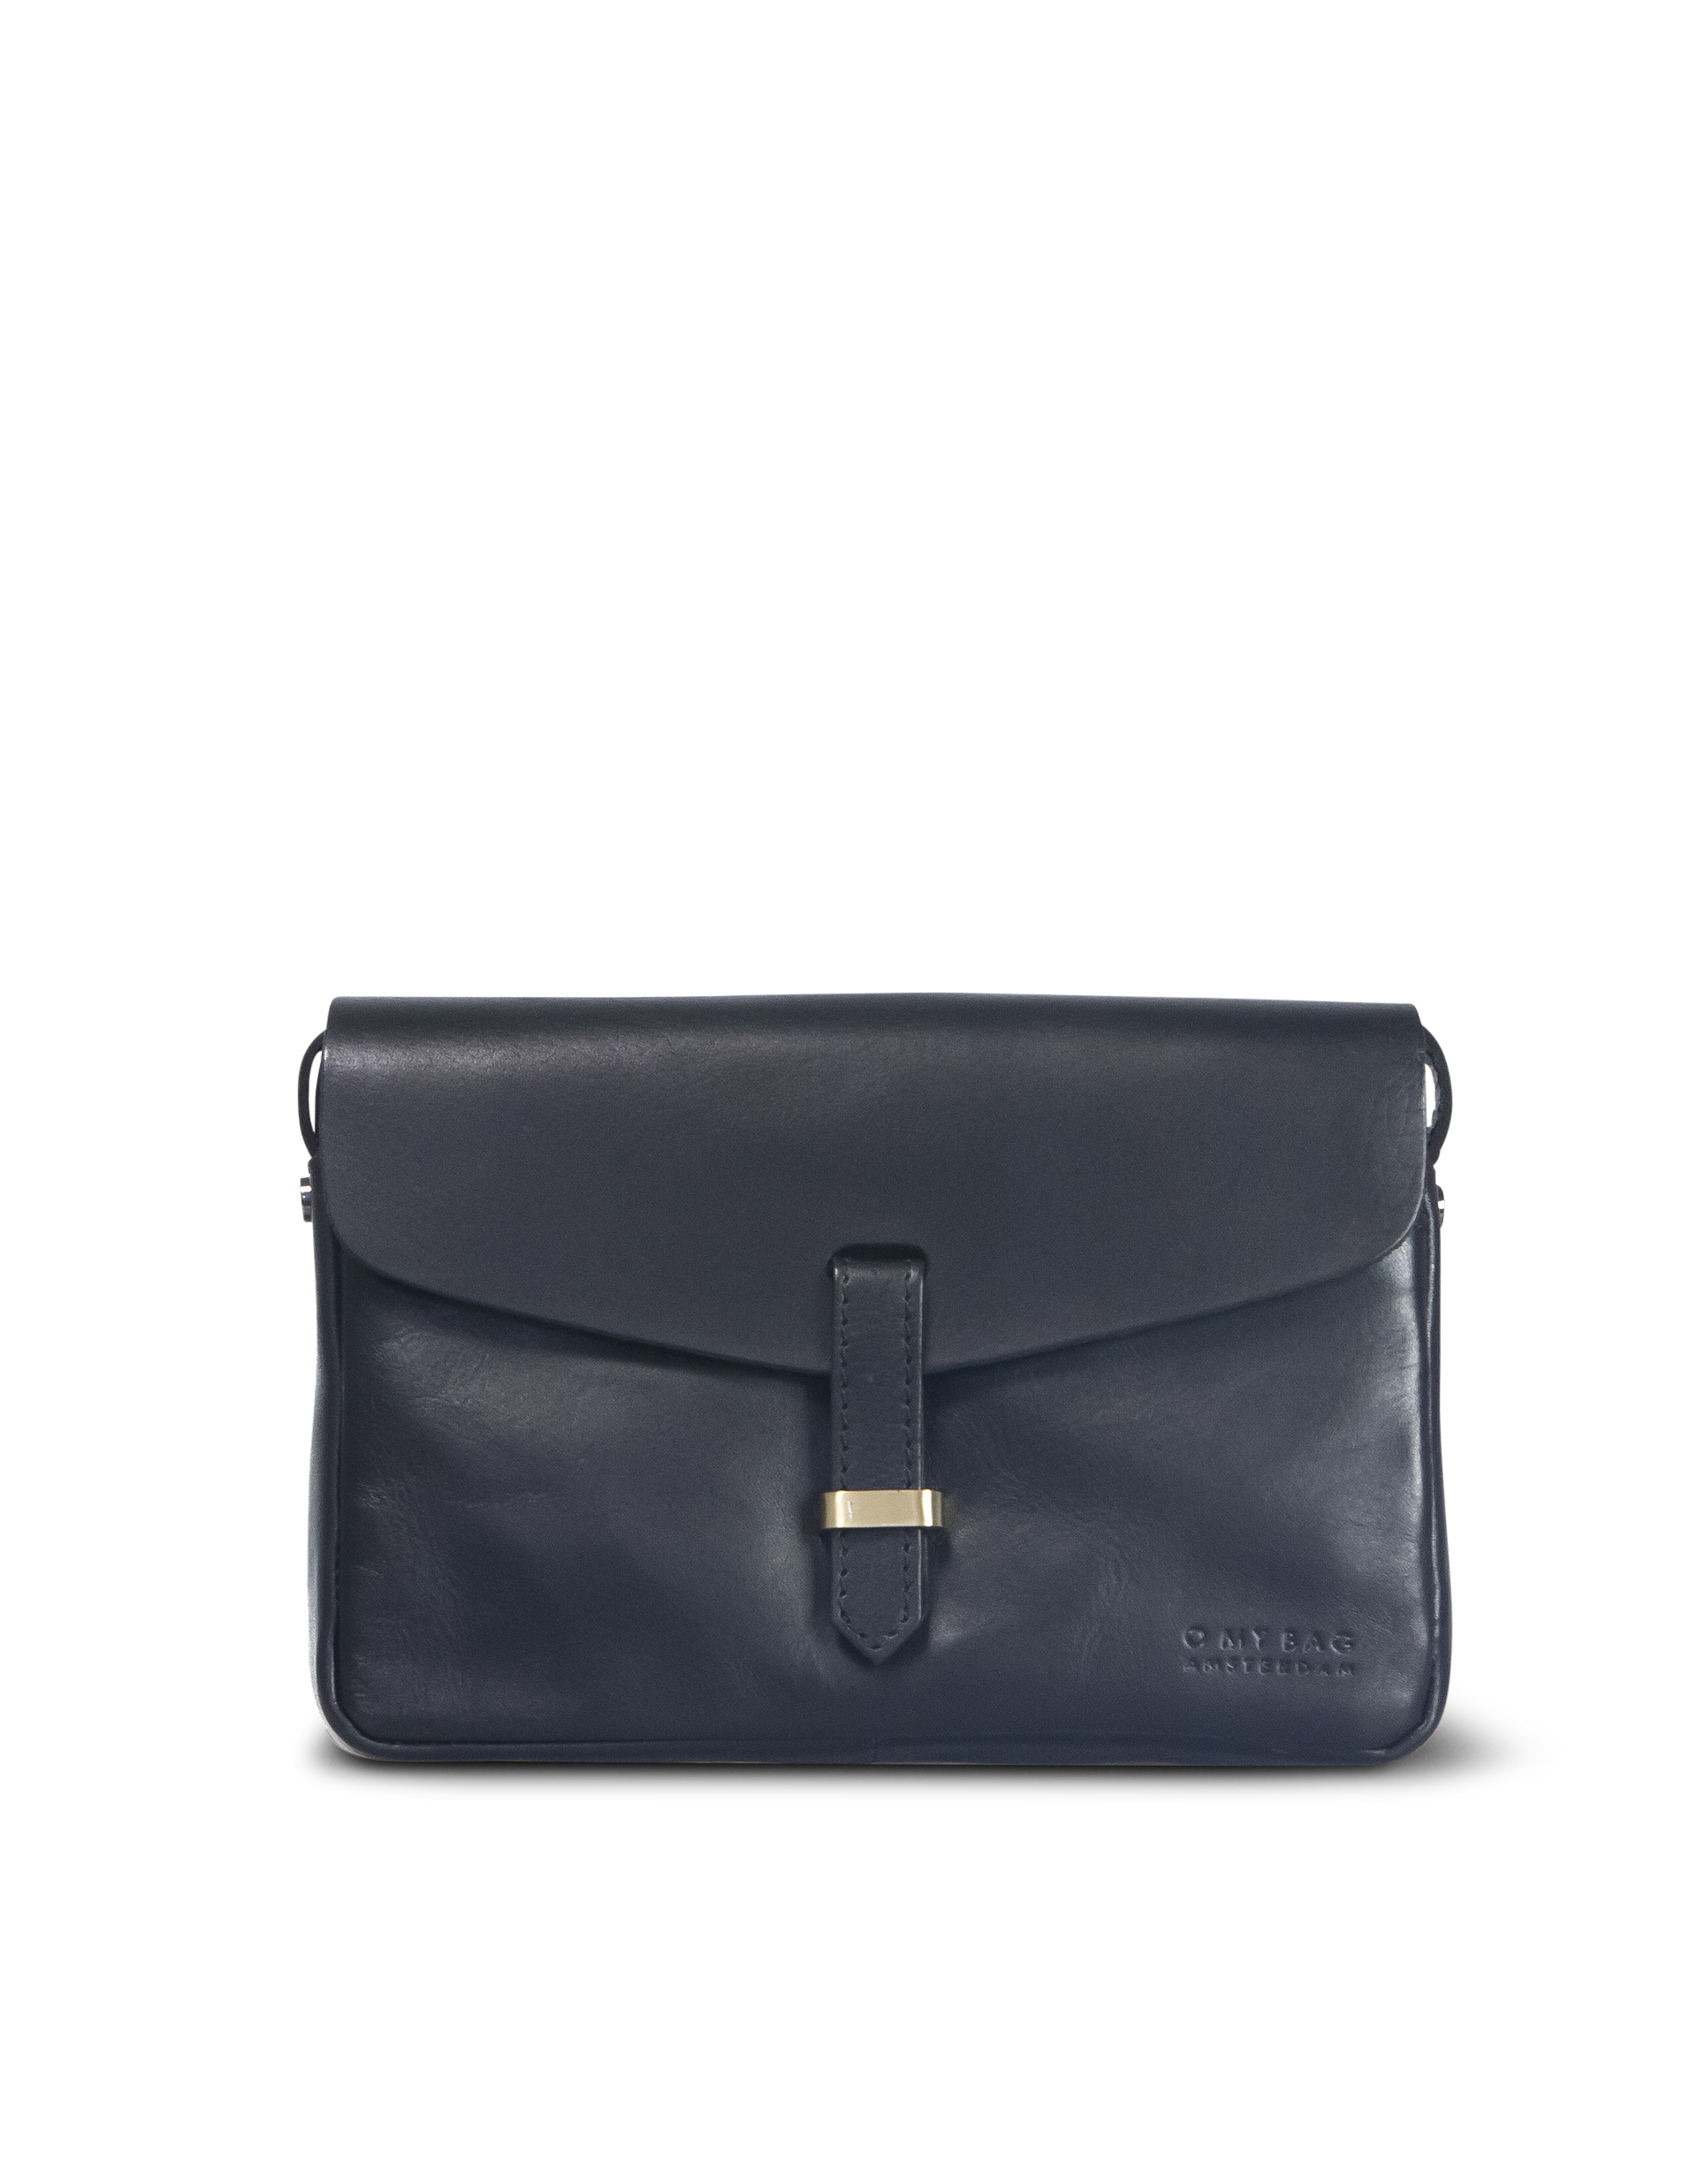 Ally Bag Midi - Black Classic Leather - Front product image